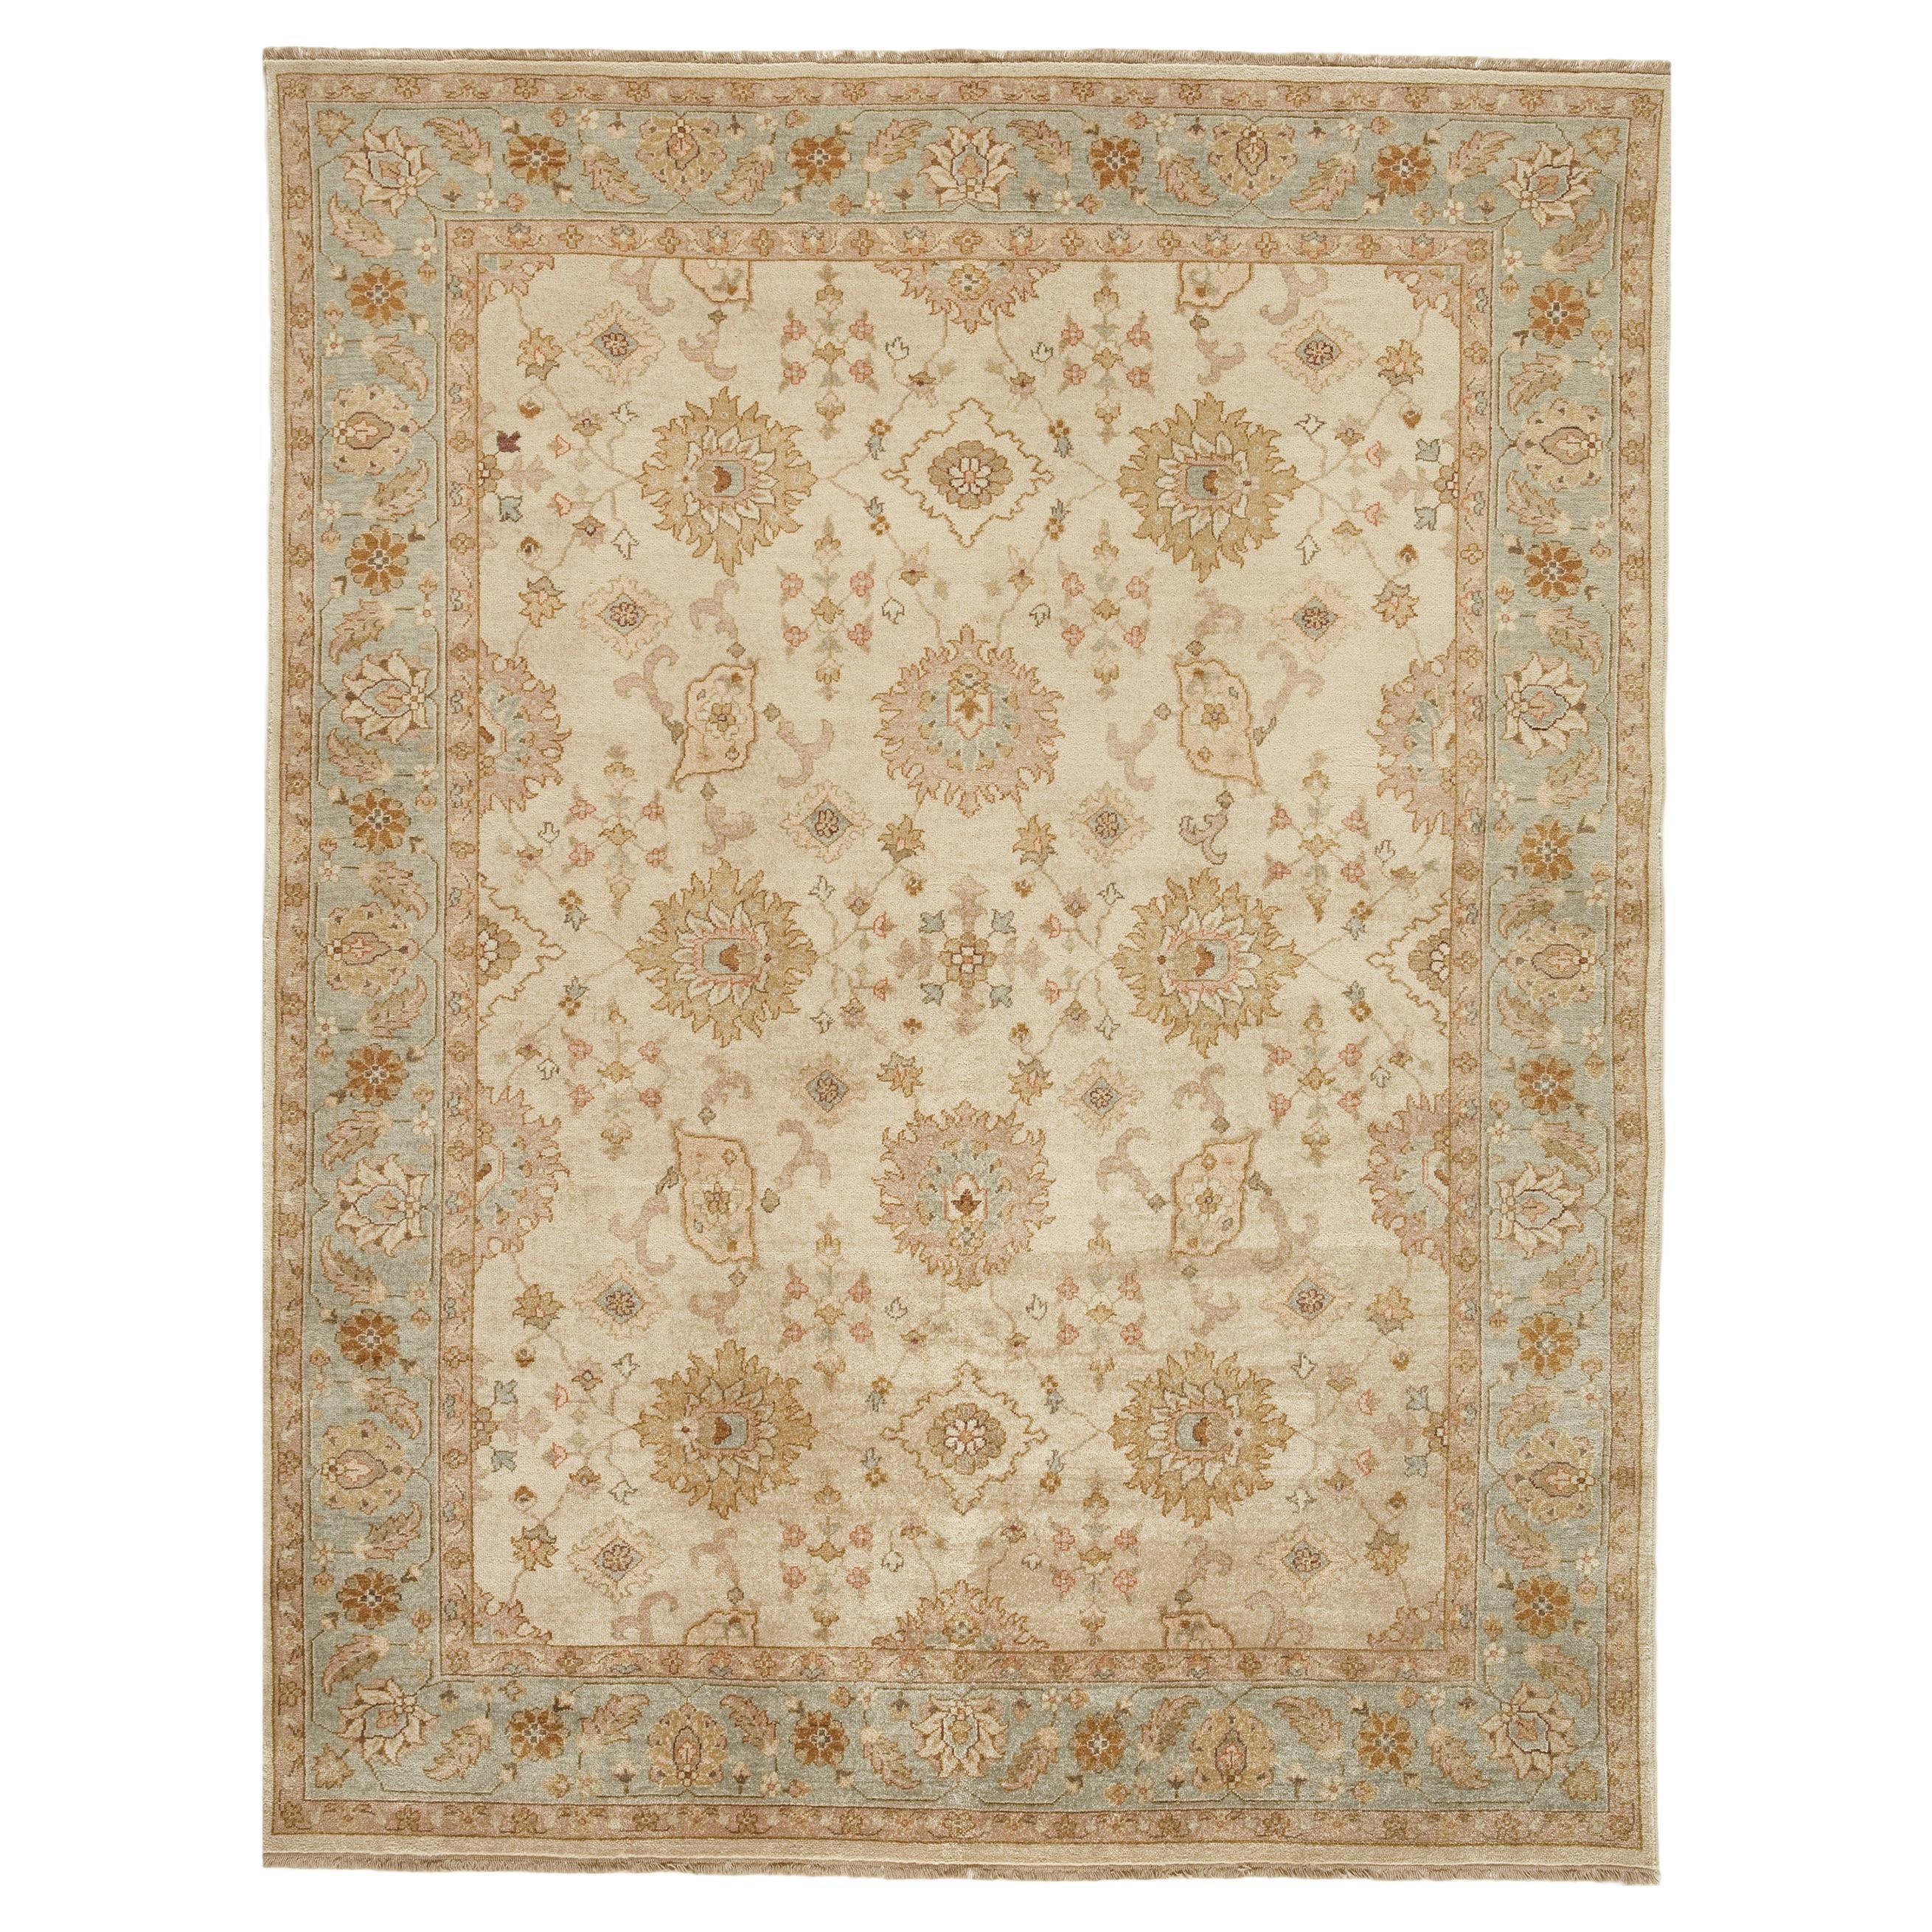 Luxury Traditional Hand-Knotted Ivory/Seafoam 10x14 Area Rug For Sale